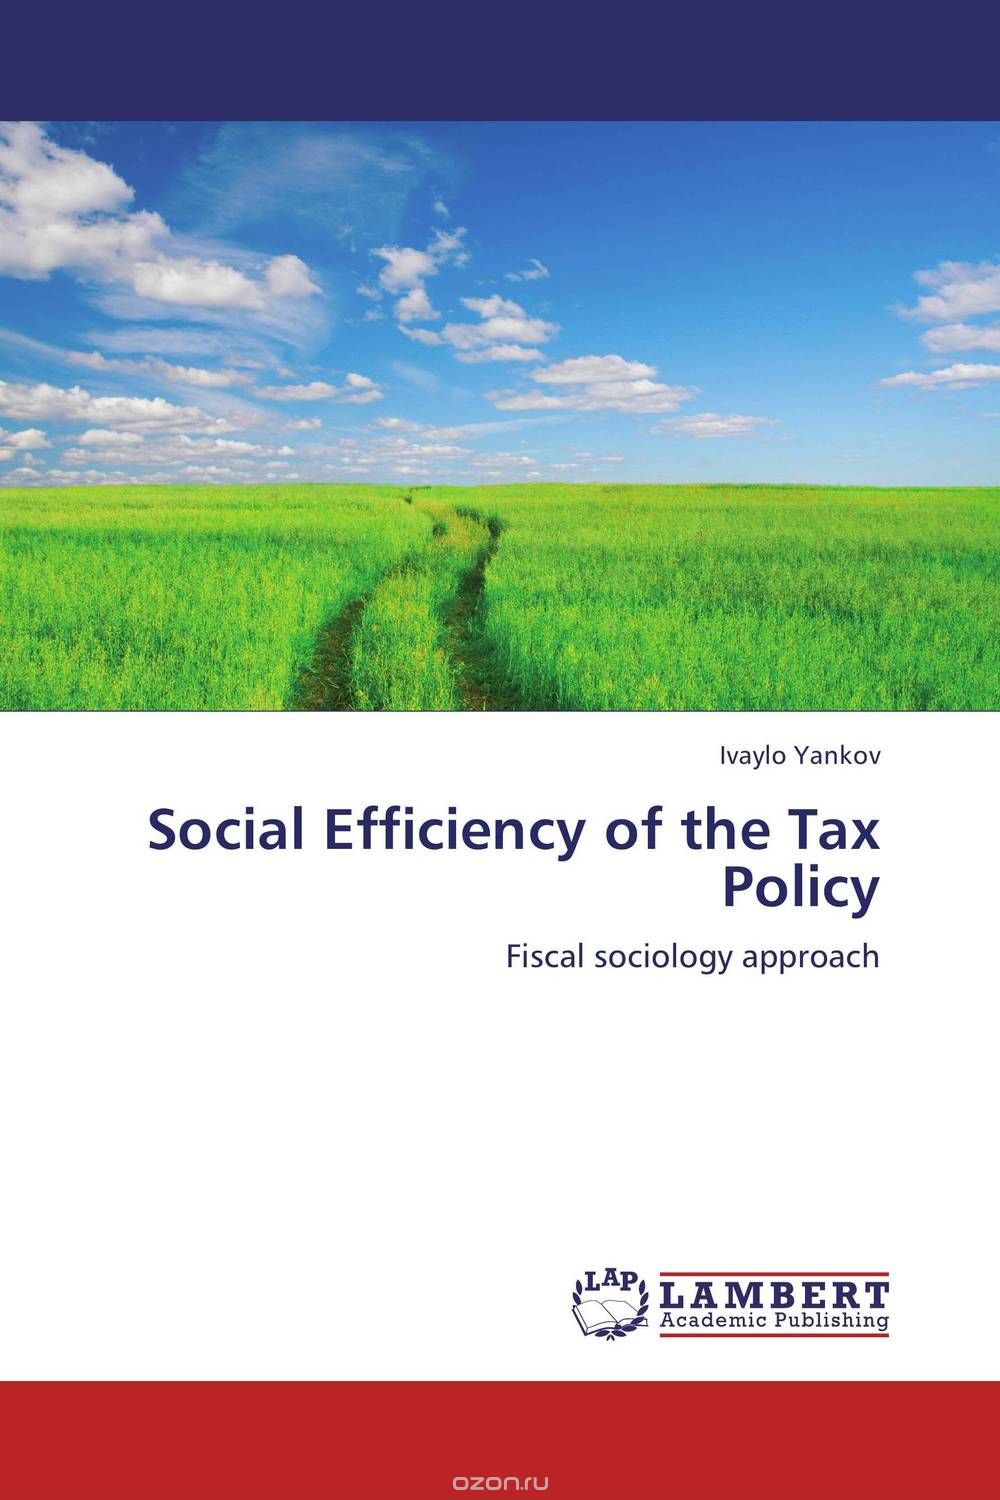 Social Efficiency of the Tax Policy